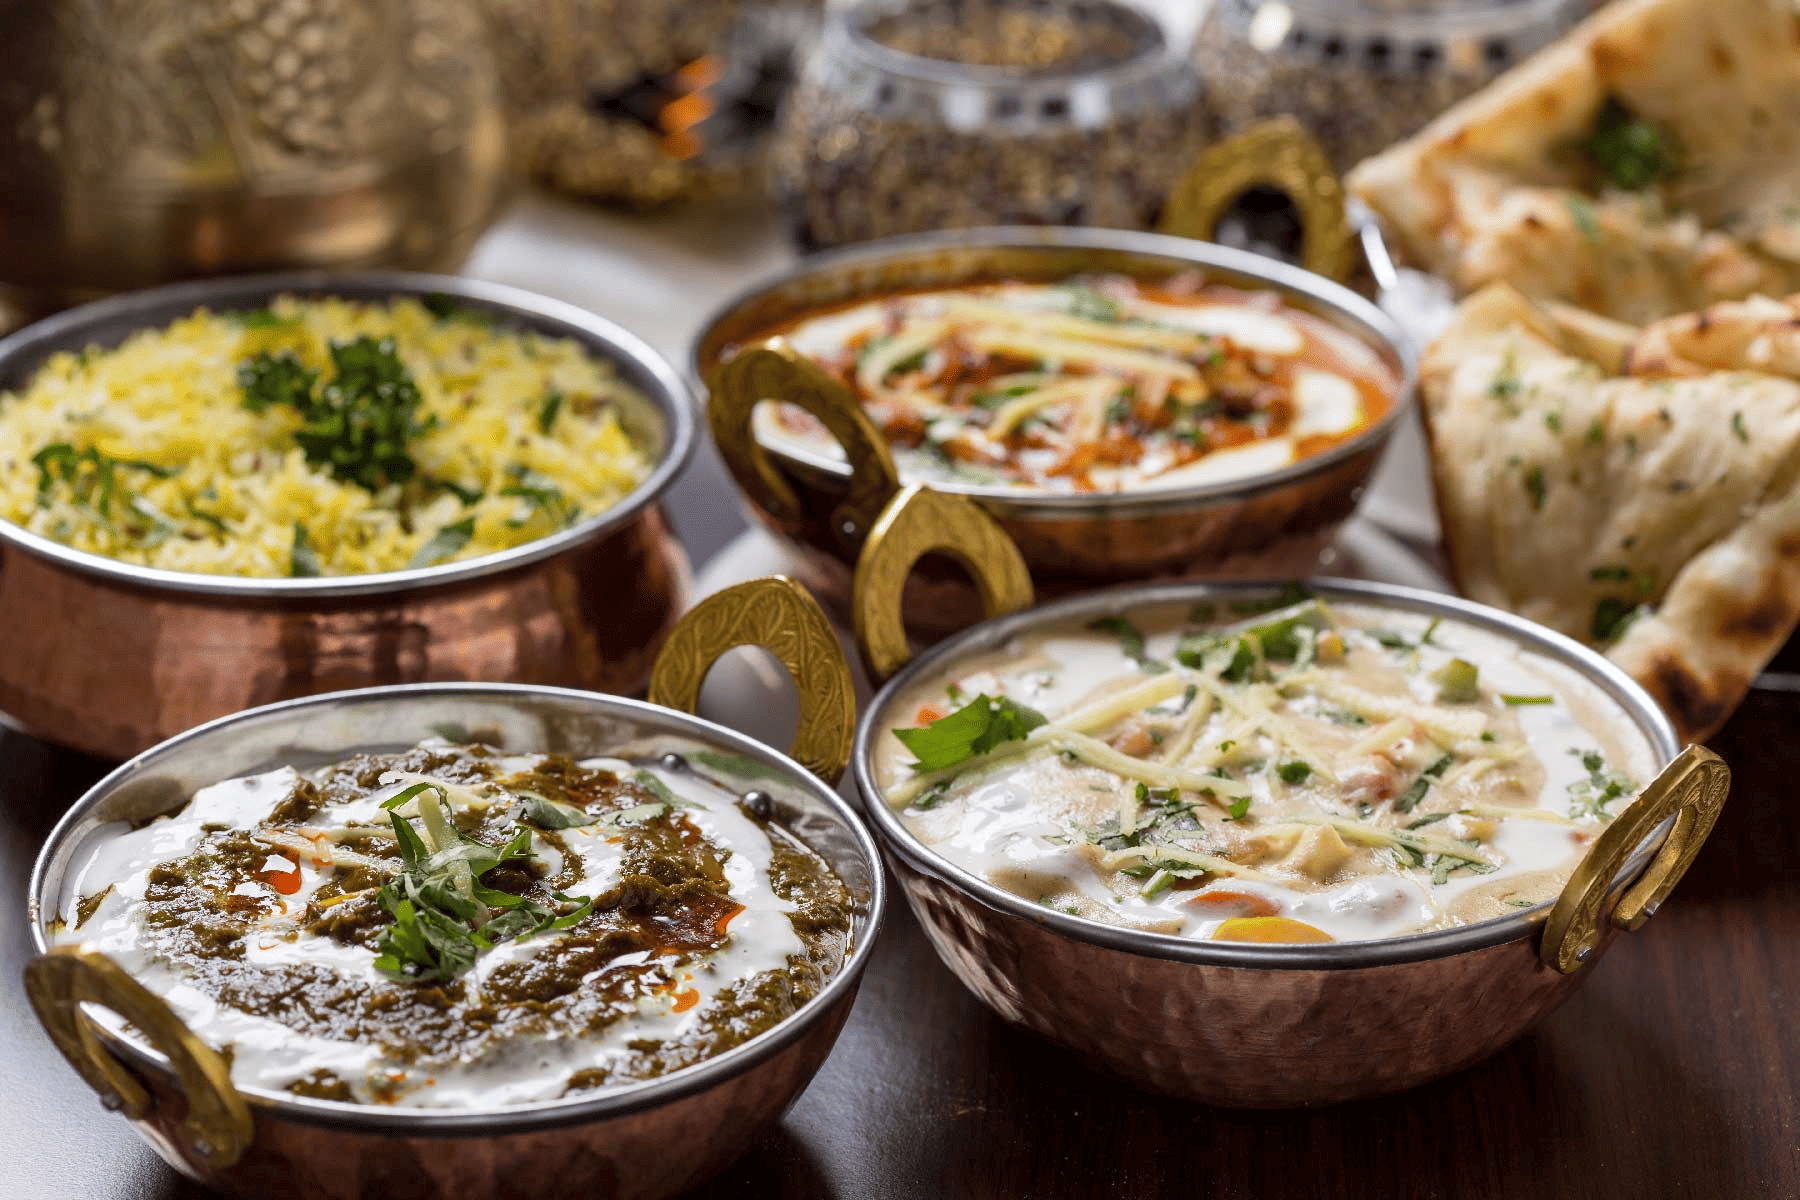 Colourful array of traditional North Indian dishes including curry, naan, and rice.